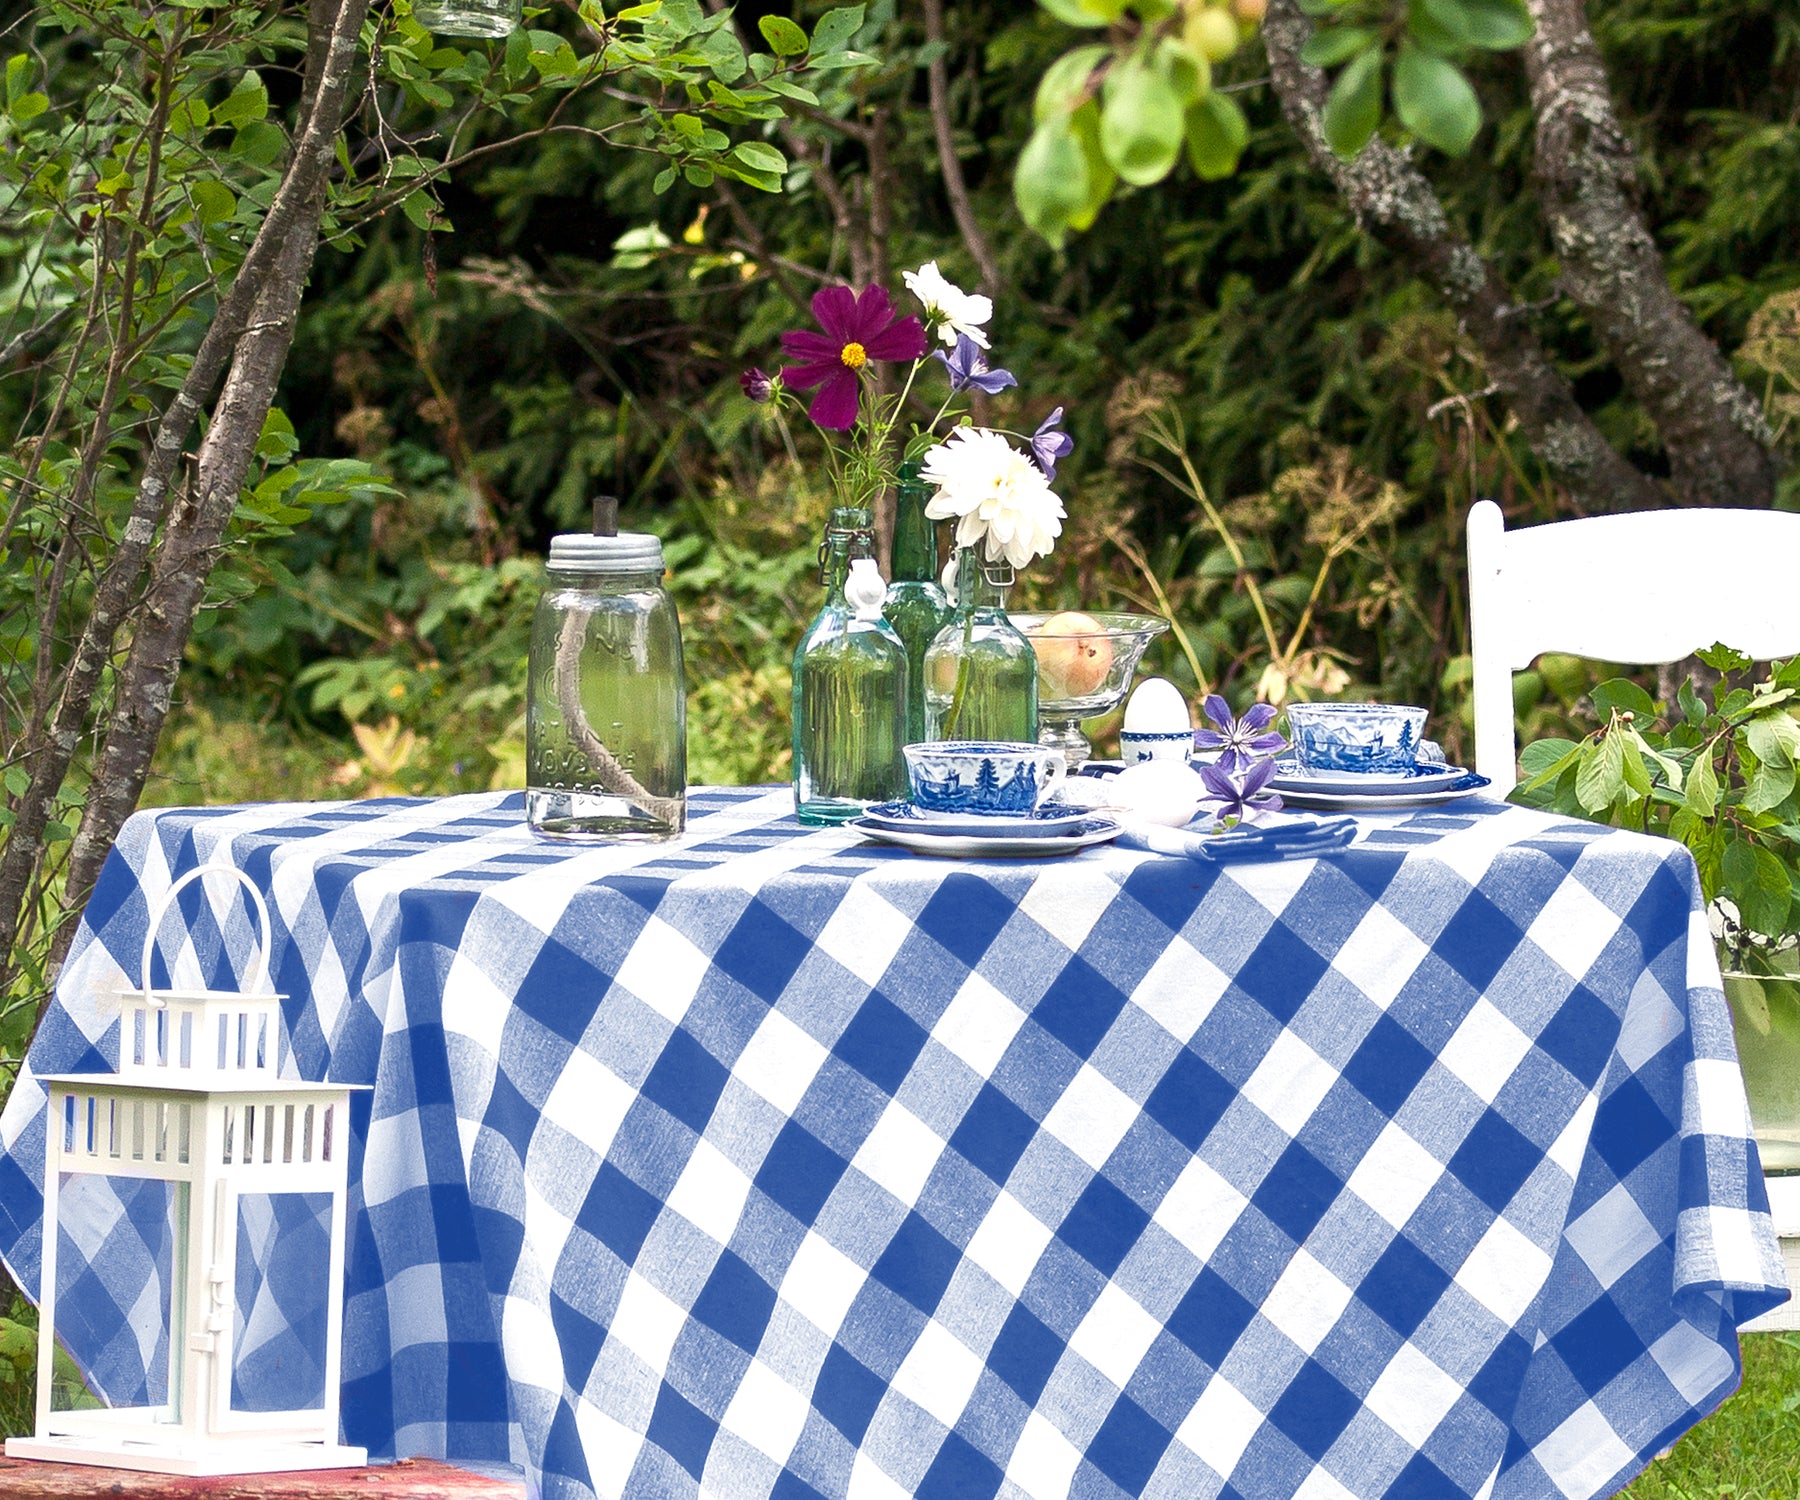 The classic pattern of a checkered tablecloth is perfect for casual events and can evoke a sense of nostalgia, bringing a relaxed atmosphere.